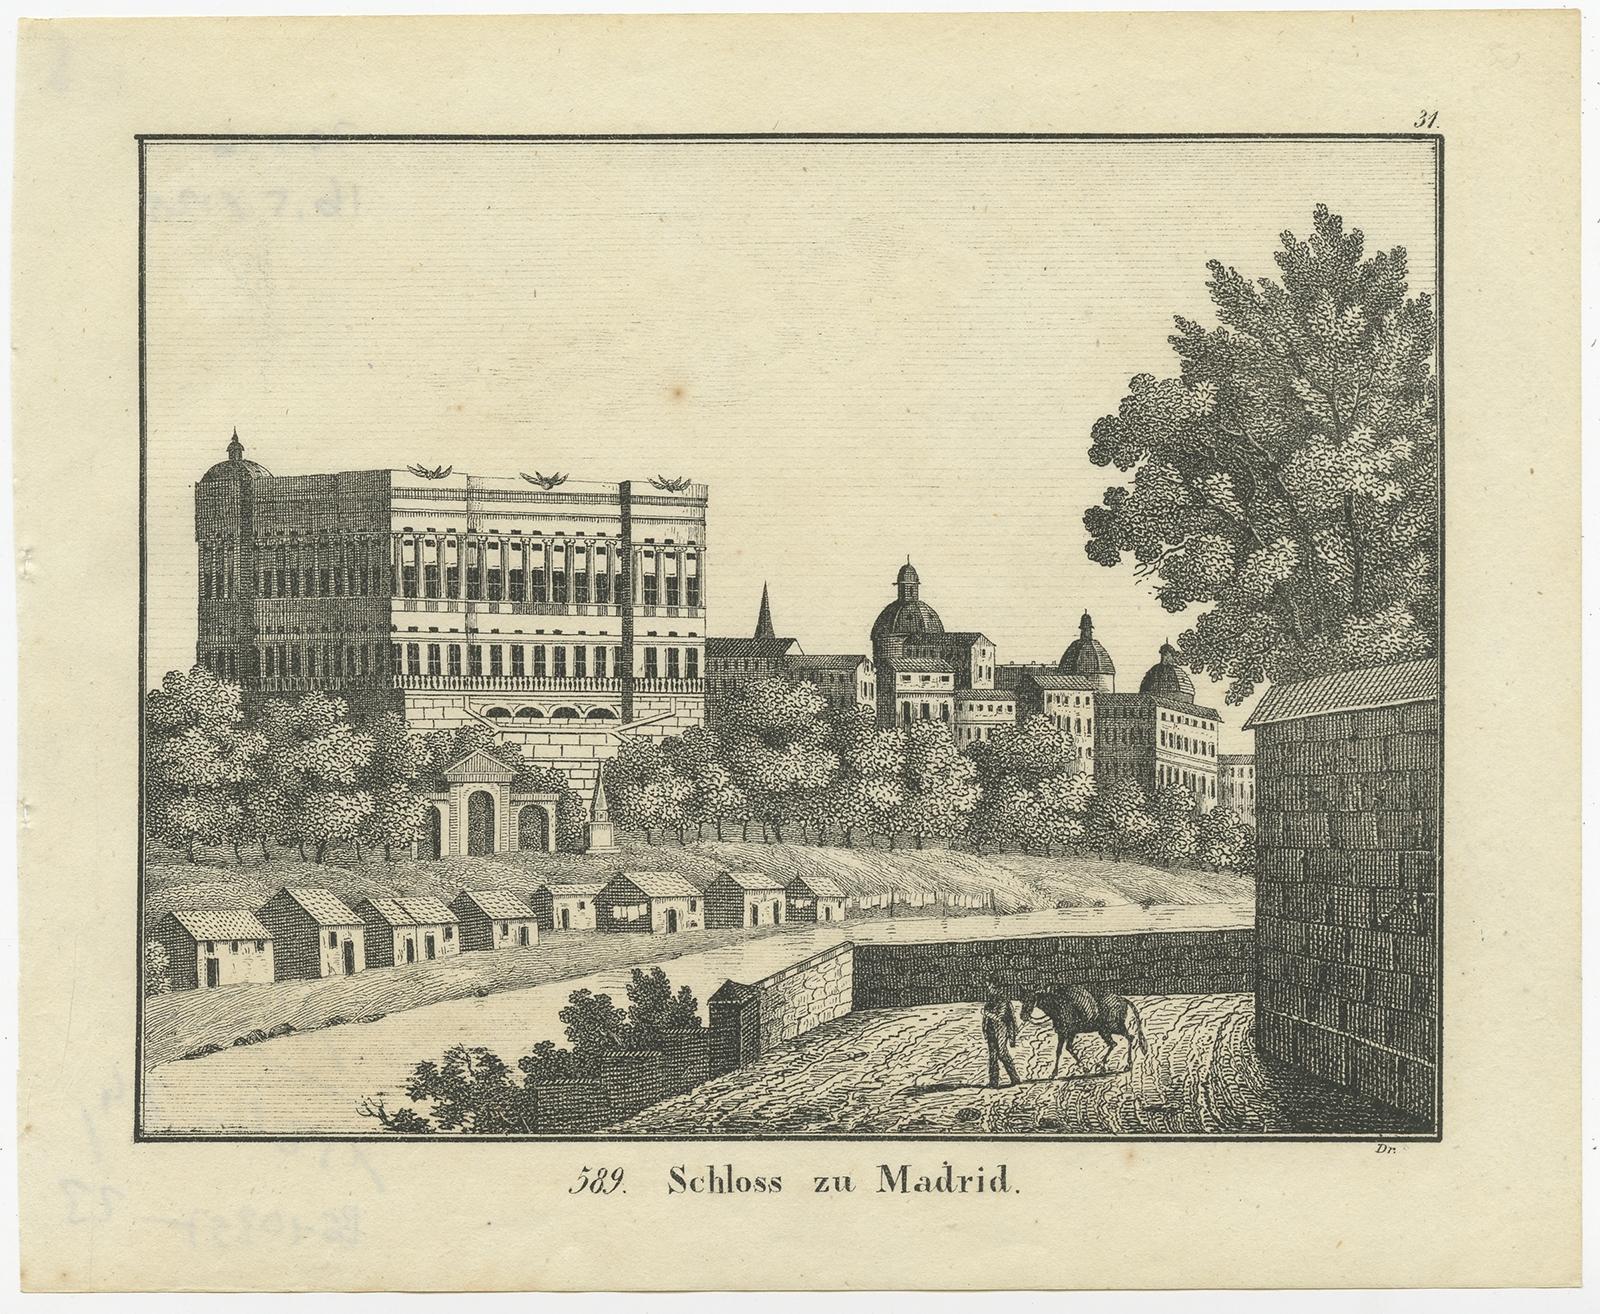 Antique print titled 'Schloss zu Madrid'. 

Lithograph of a castle in Madrid, Spain. This print originates from 'Neuen Bildergalerie für die Jugend'. 

Artists and Engravers: Anonymous.

Condition: Very good, general age-related toning. Blank